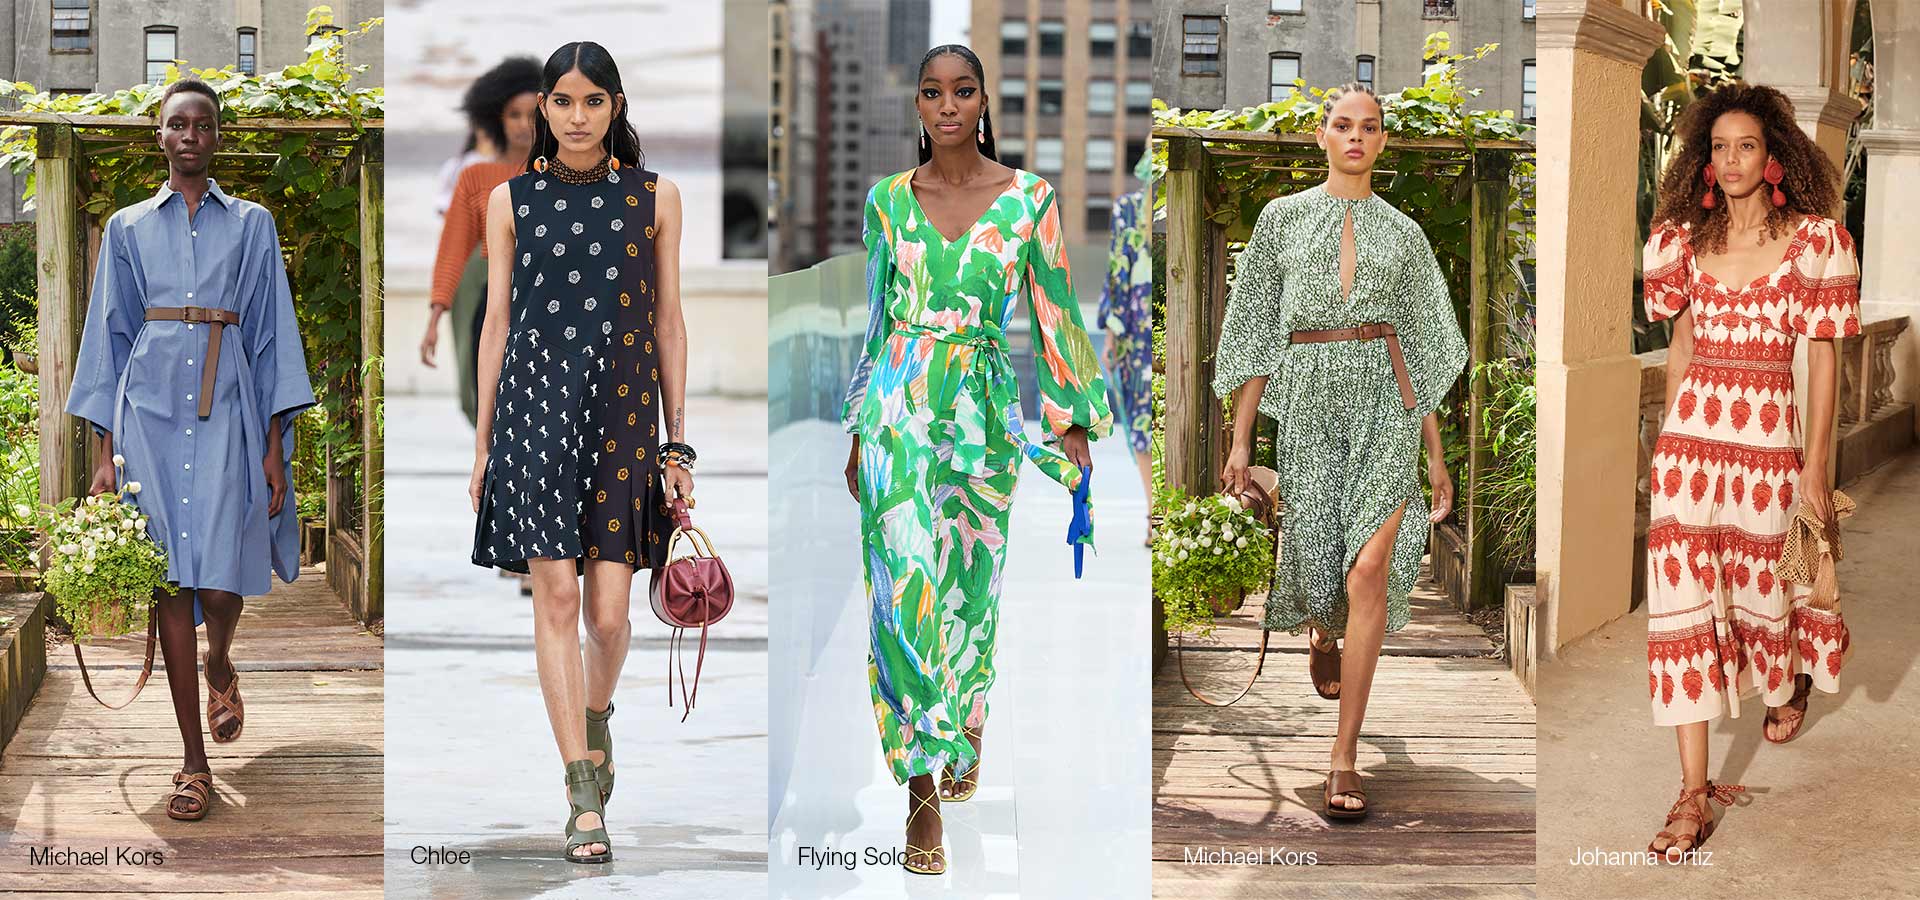 DRESSES To Wear To The Office This Summer The Fashion Tag, 60% OFF